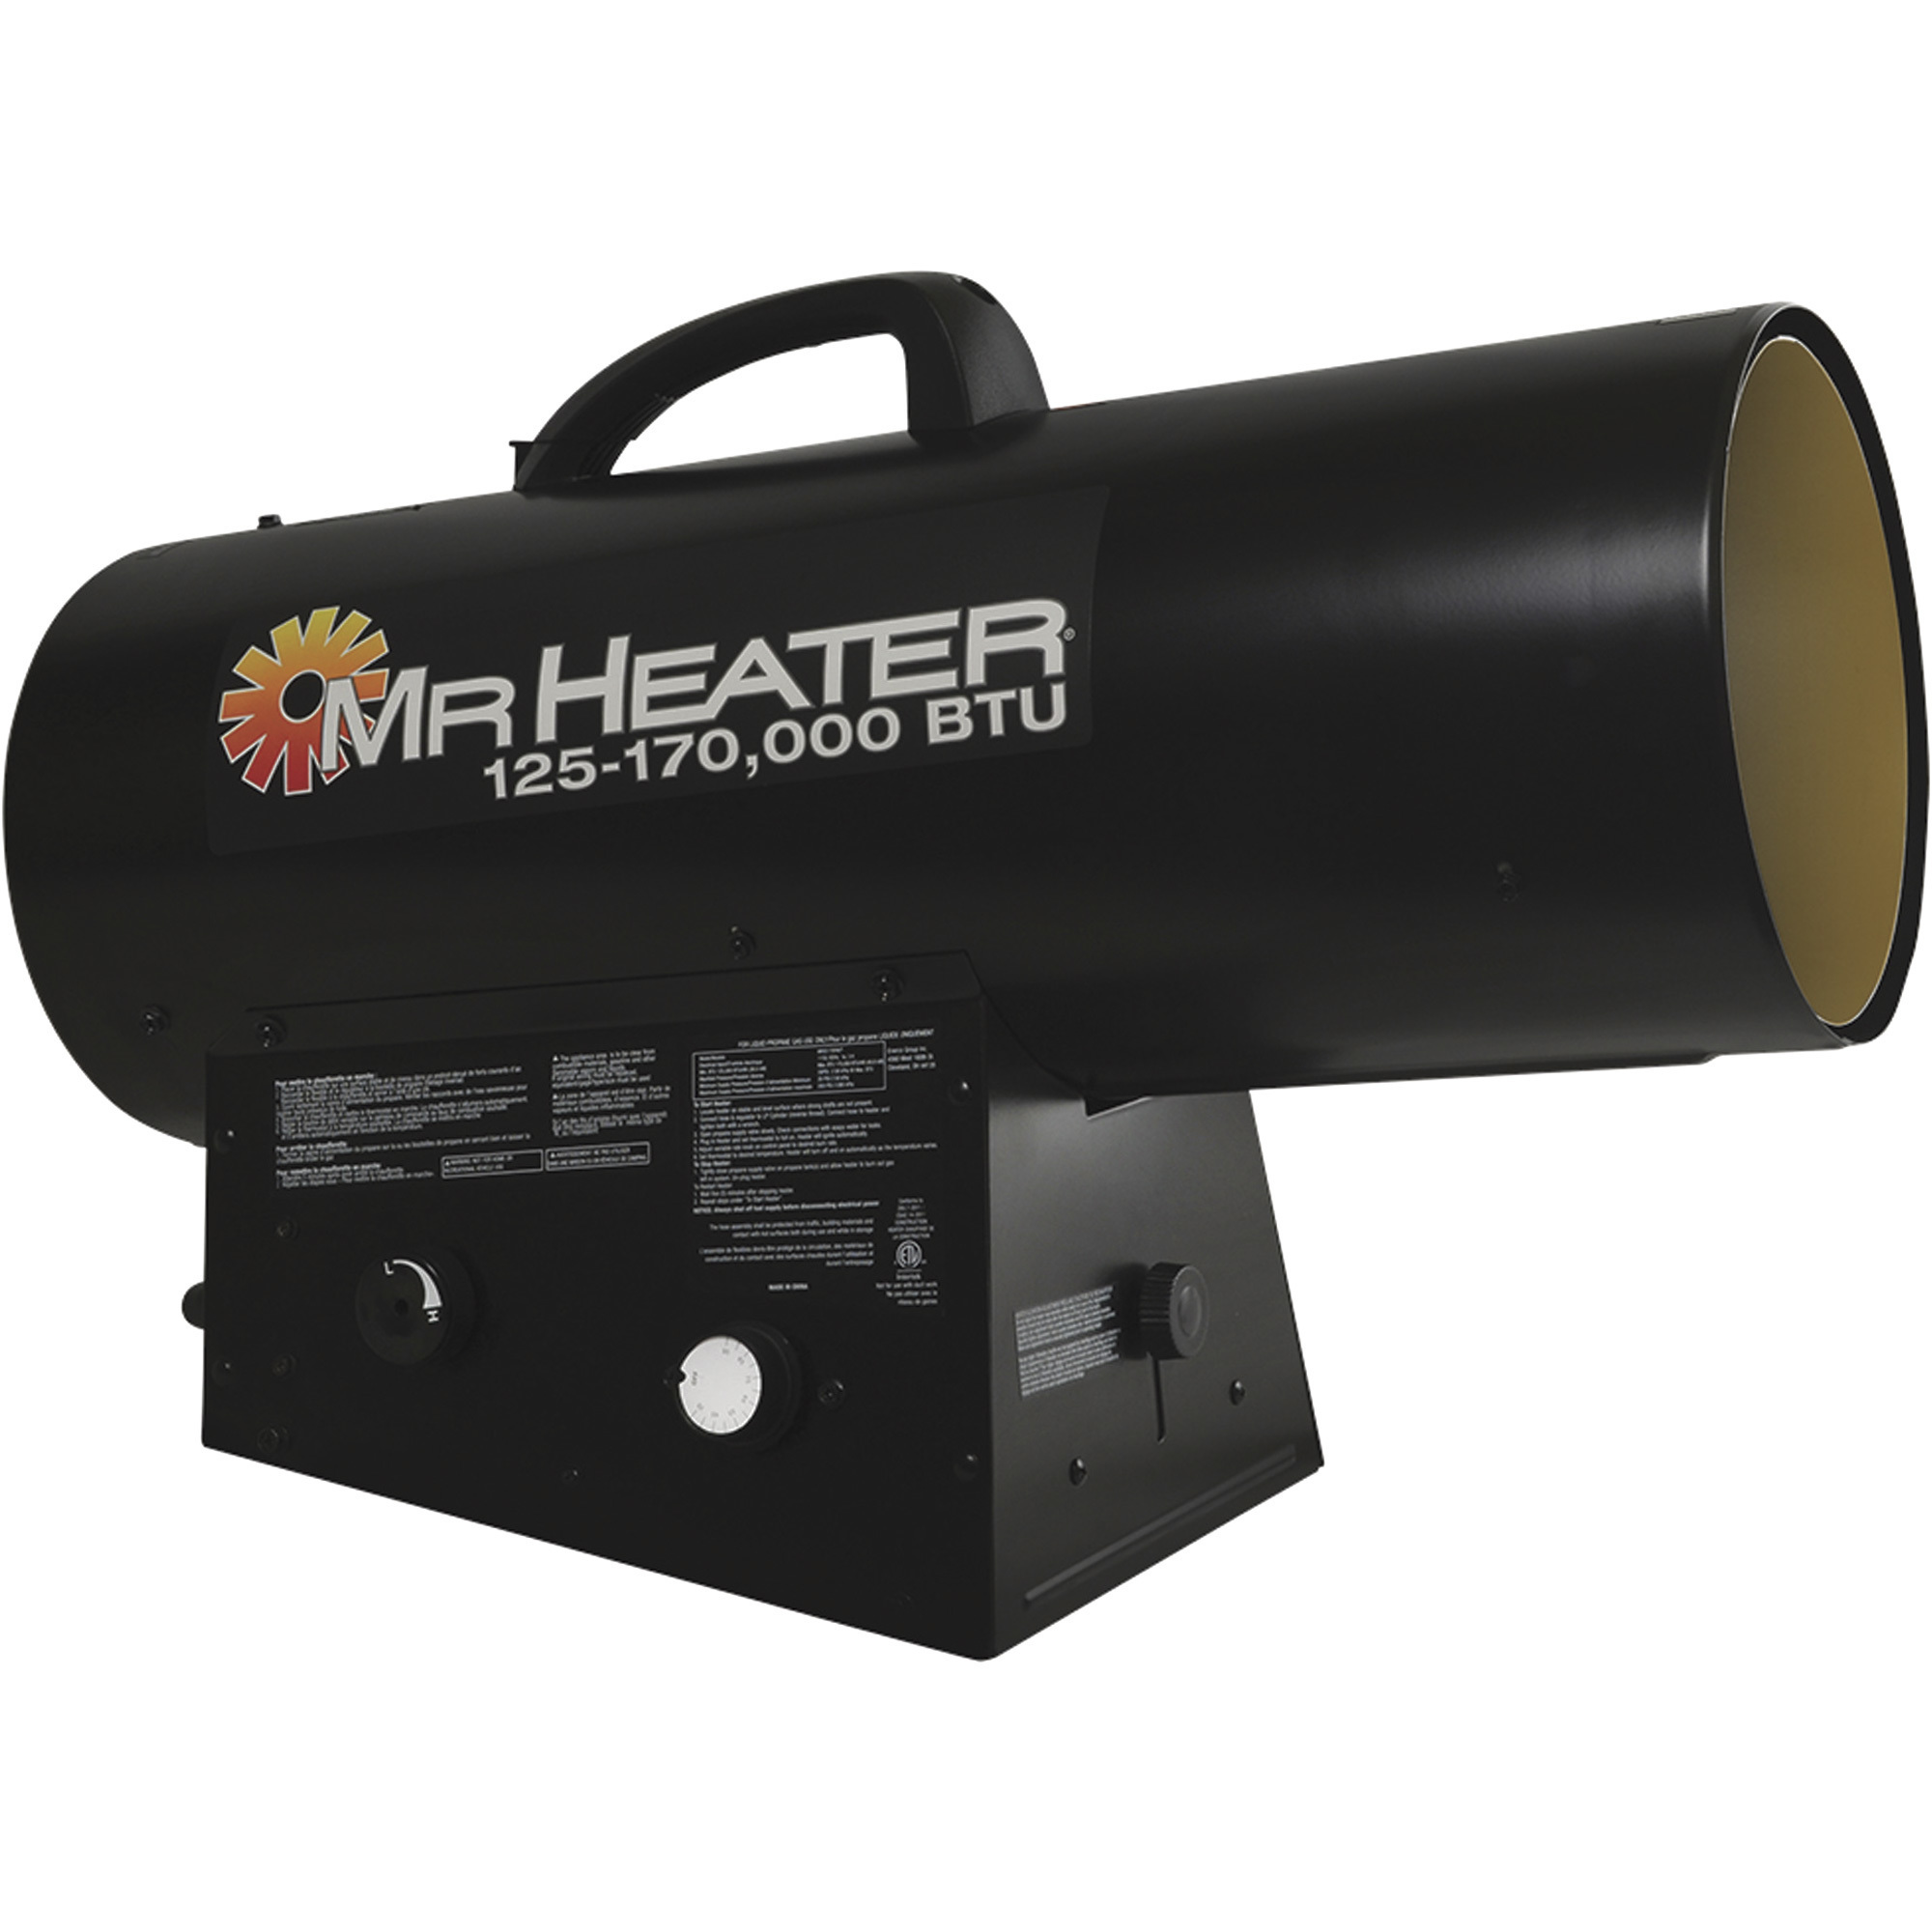 Mr. Heater Portable Propane Forced Air Heater with Quiet Burn Technology, 170,000 BTU, Model F271400